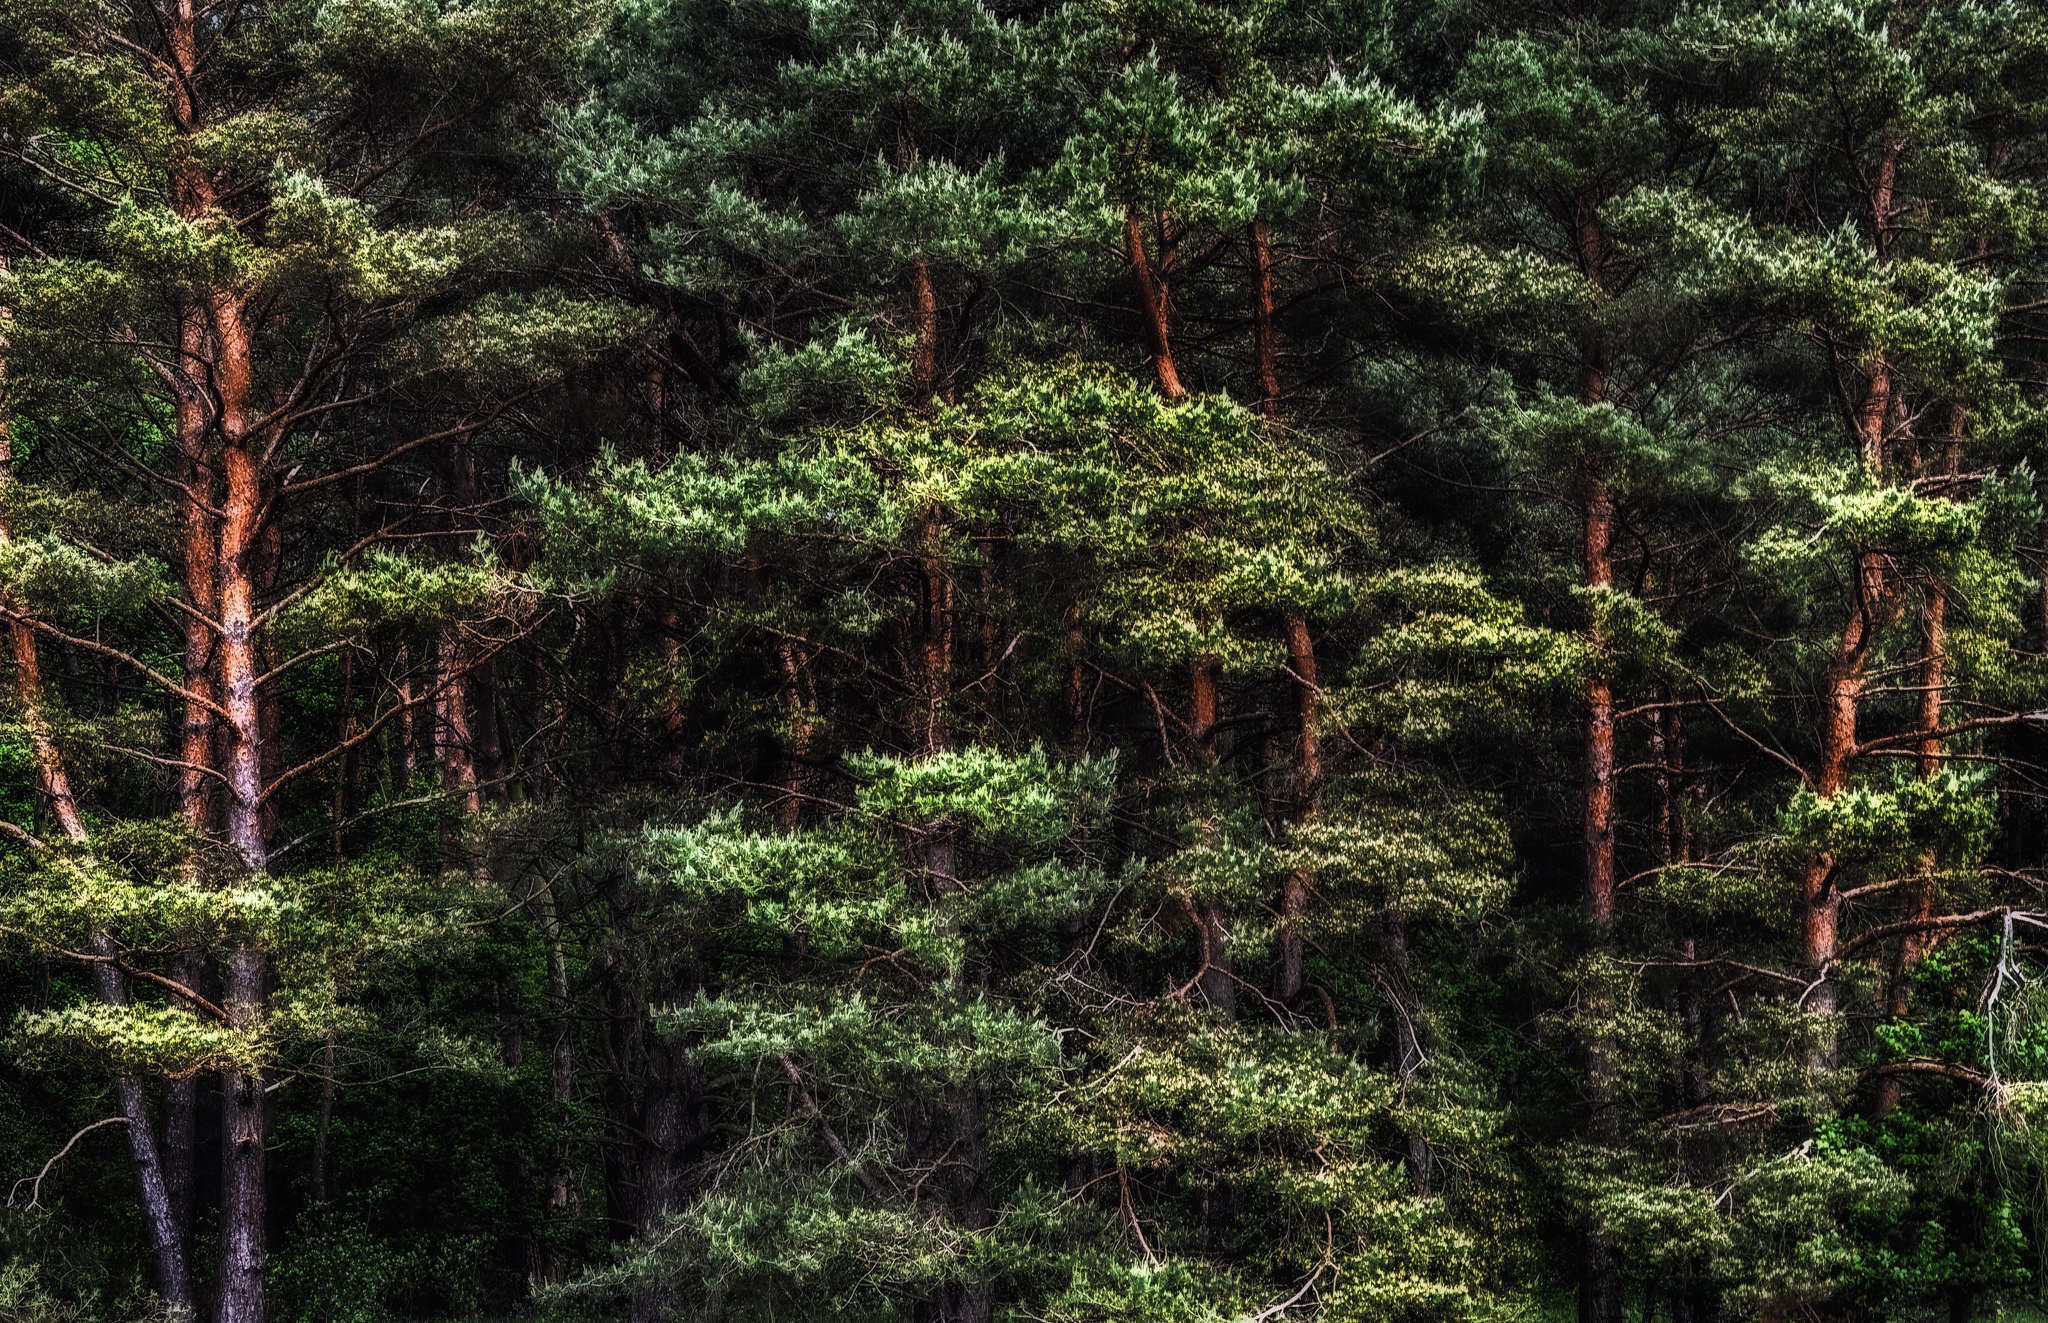 General 2048x1323 plants trees outdoors HDR forest pine trees nature